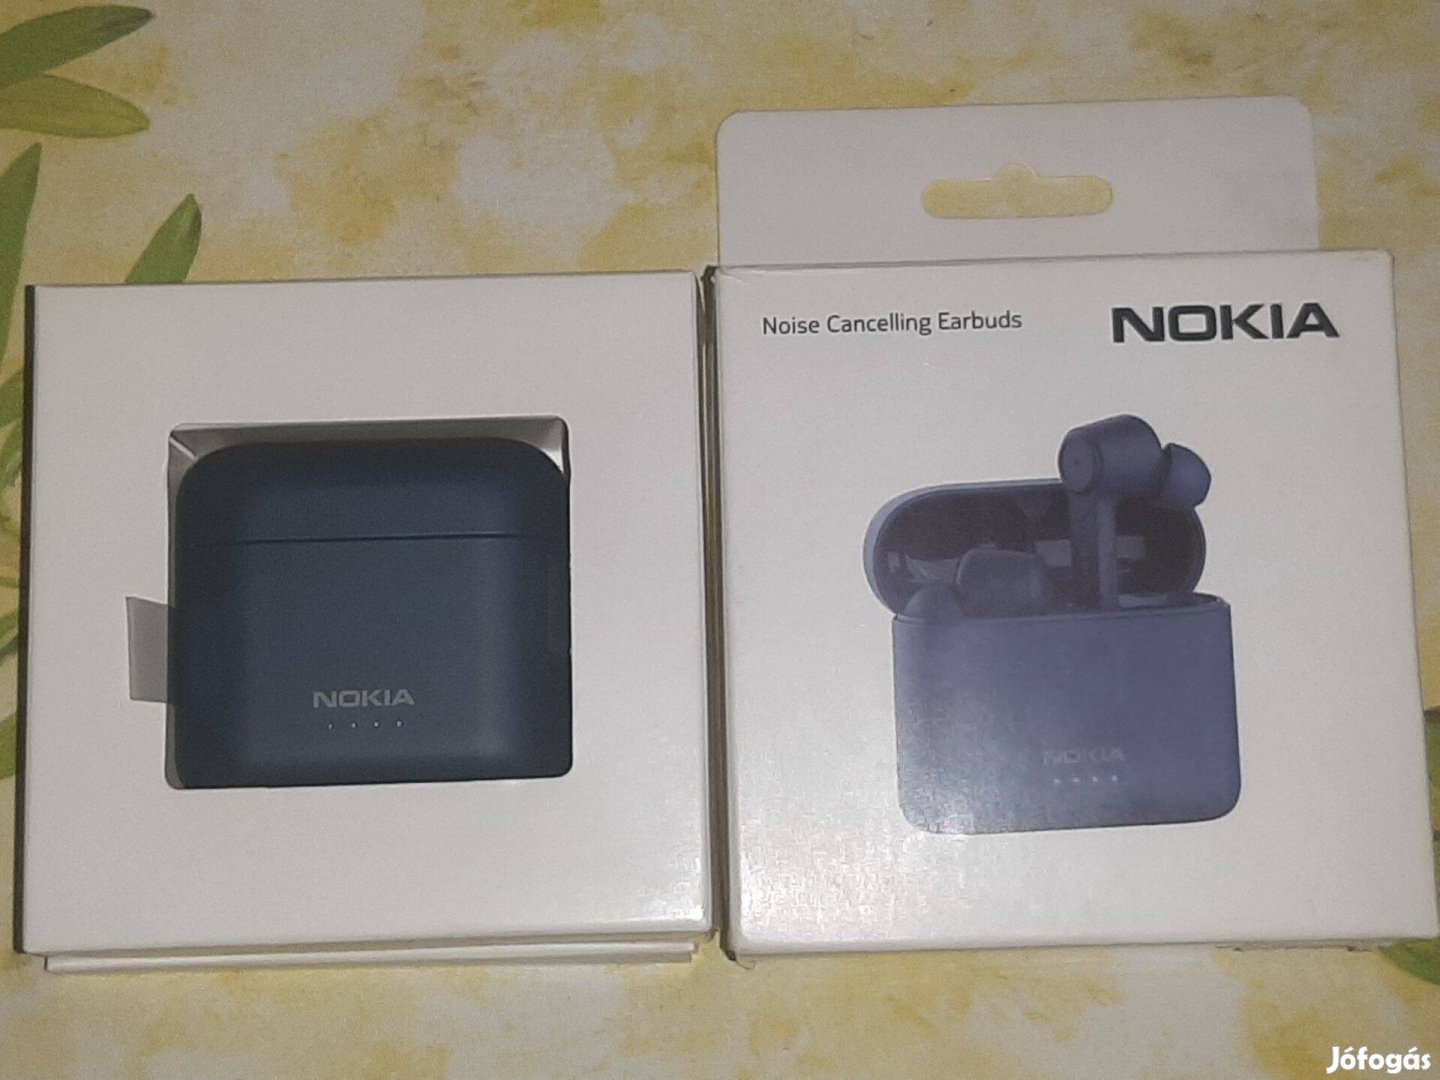 Nokia BH-805 Noise Cancelling Earbuds